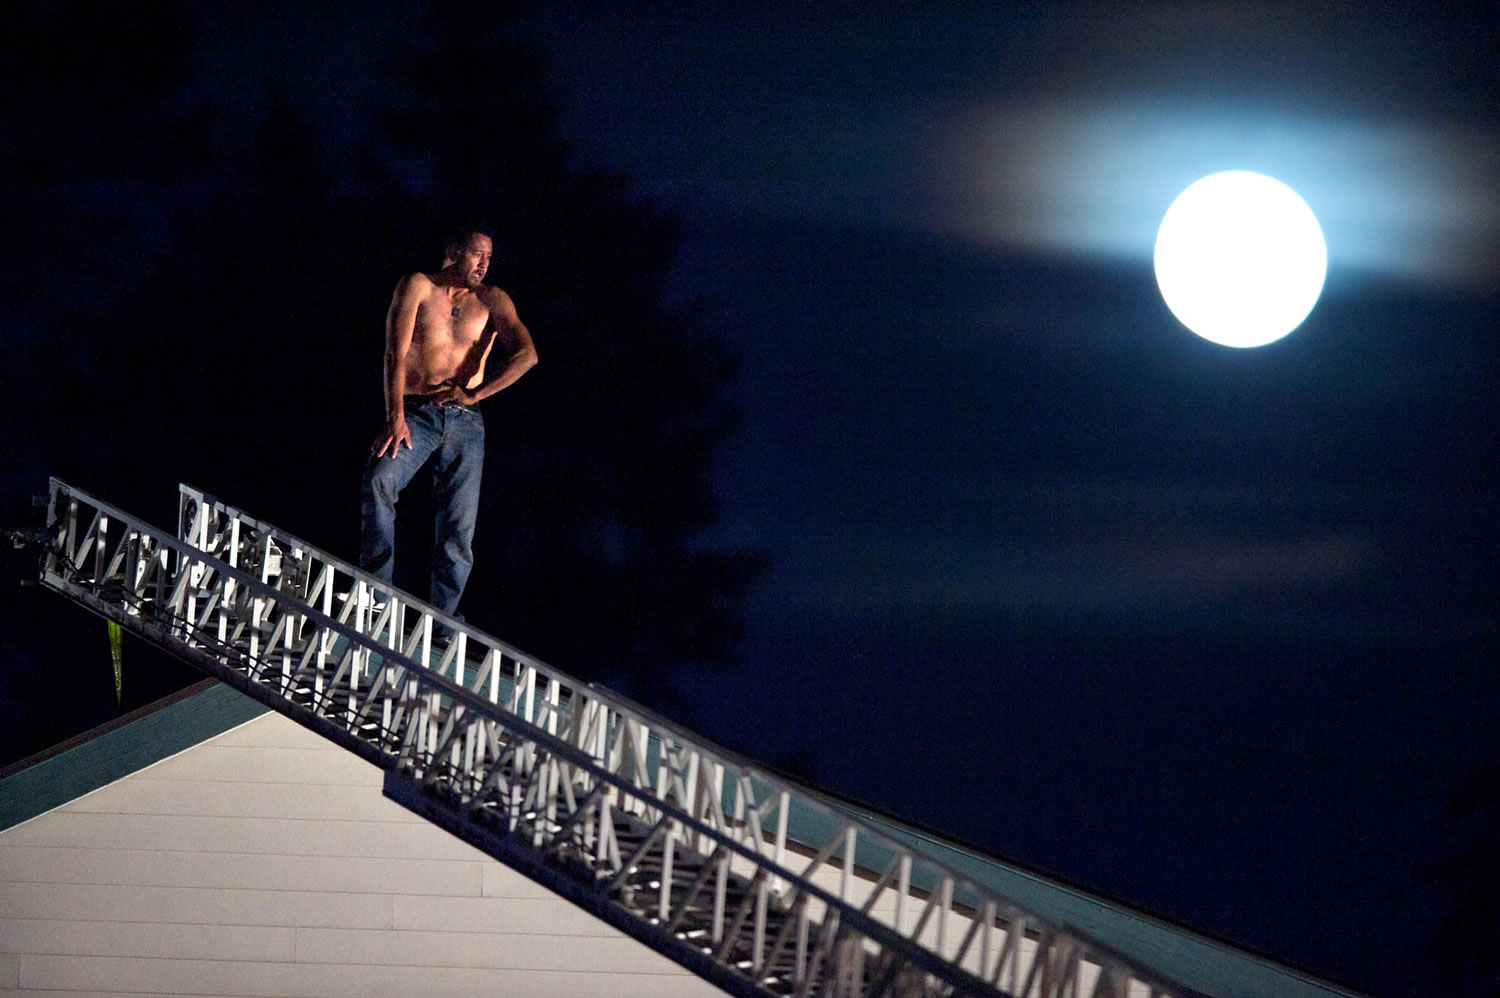 As the harvest moon rises behind him, a man identified as Angel M.